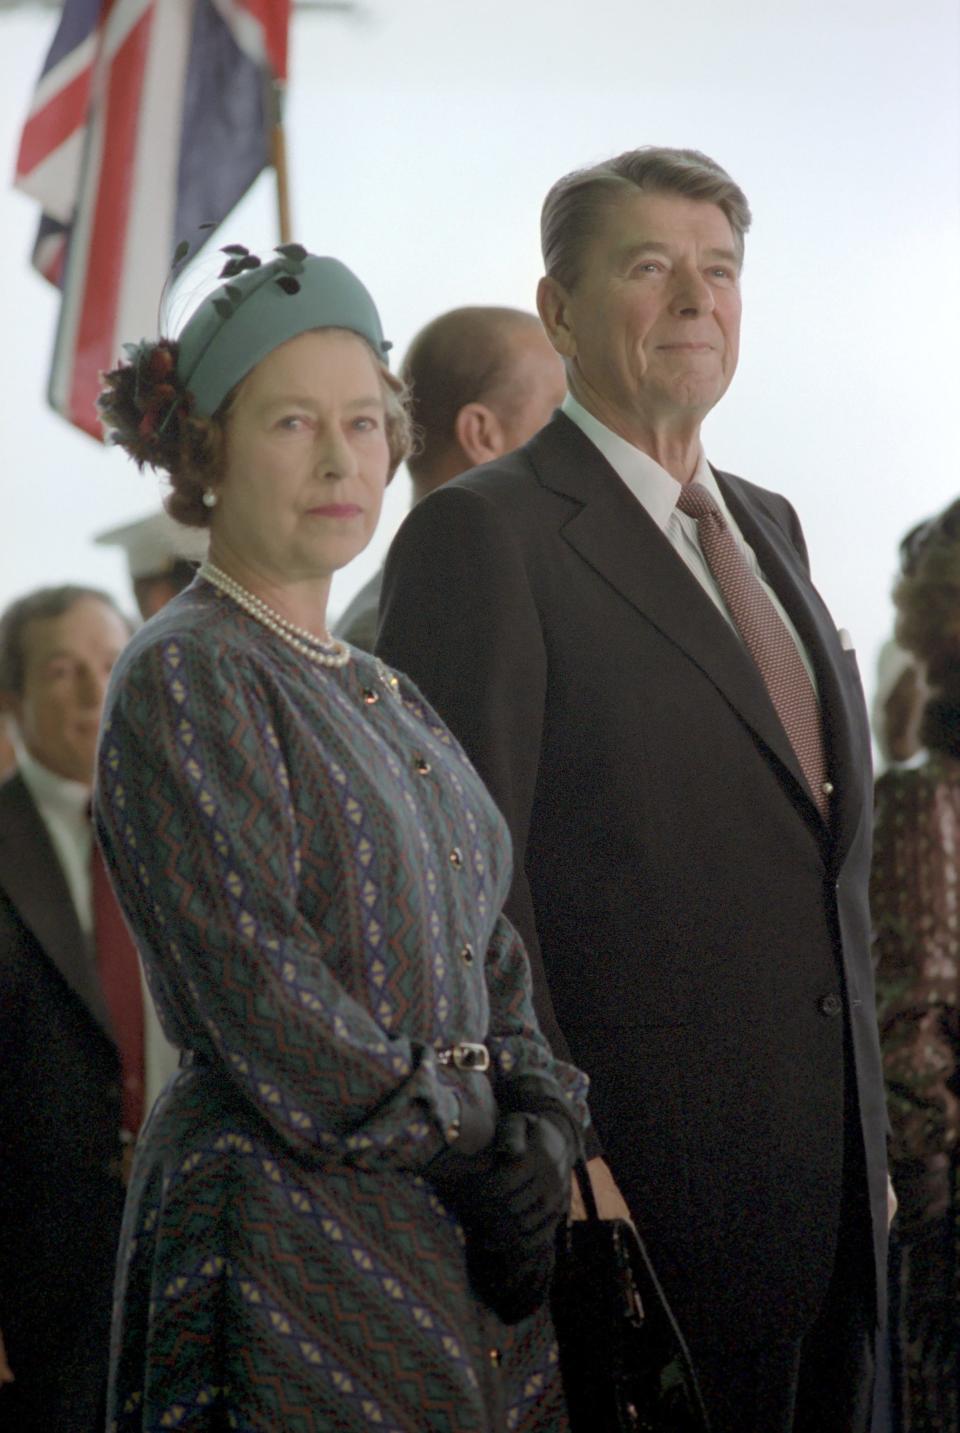 Queen Elizabeth II stands alongside President Ronald Reagan during a ceremony marking her arrival at Santa Barbara Airport in 1983.